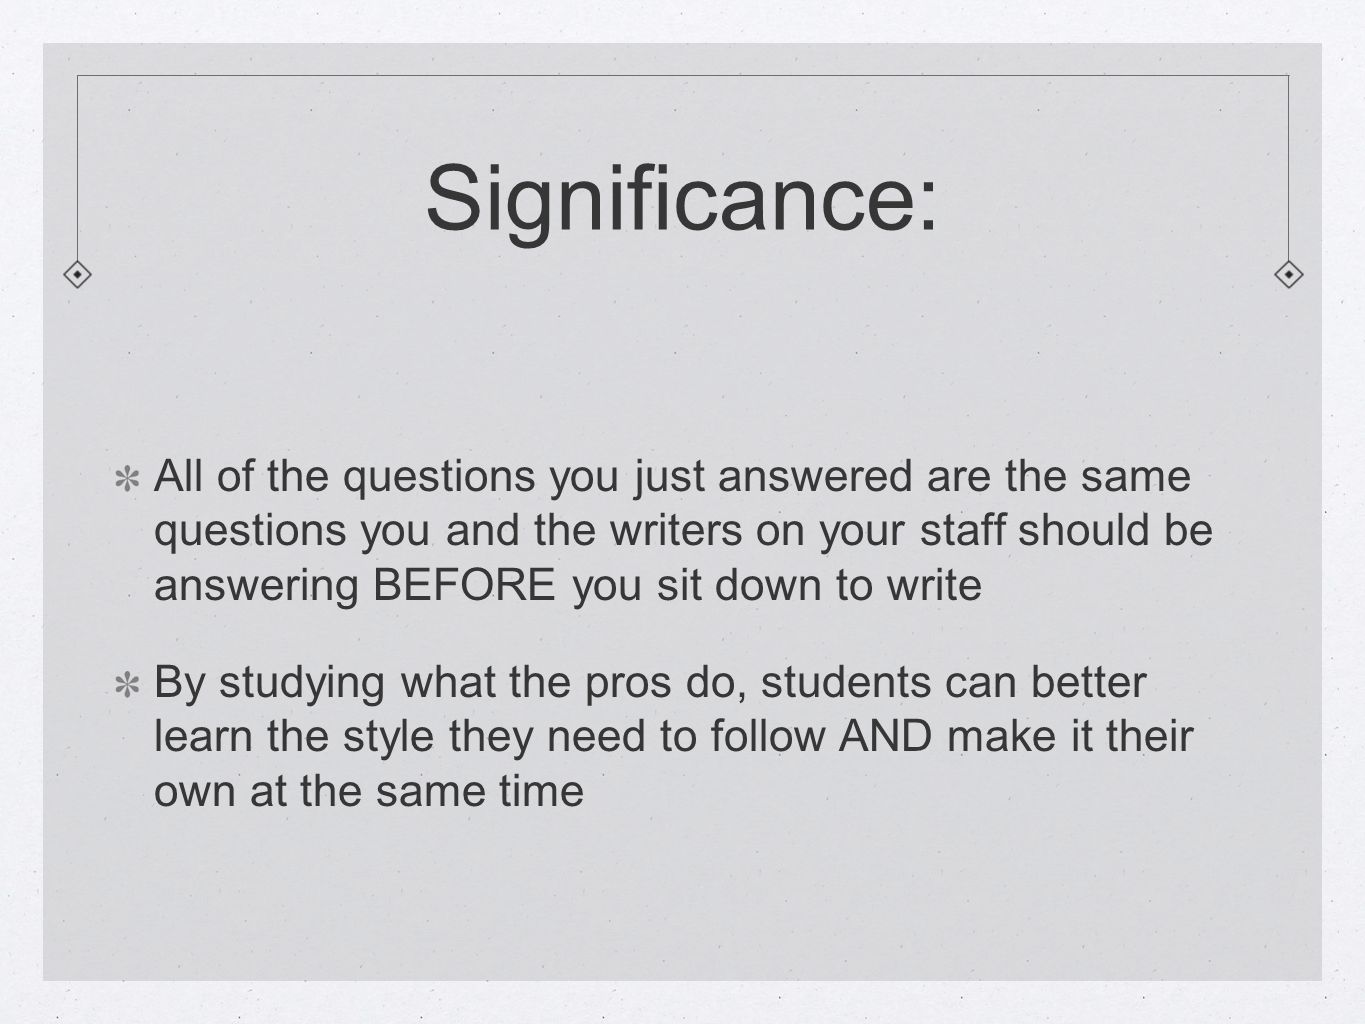 Significance: All of the questions you just answered are the same questions you and the writers on your staff should be answering BEFORE you sit down to write By studying what the pros do, students can better learn the style they need to follow AND make it their own at the same time